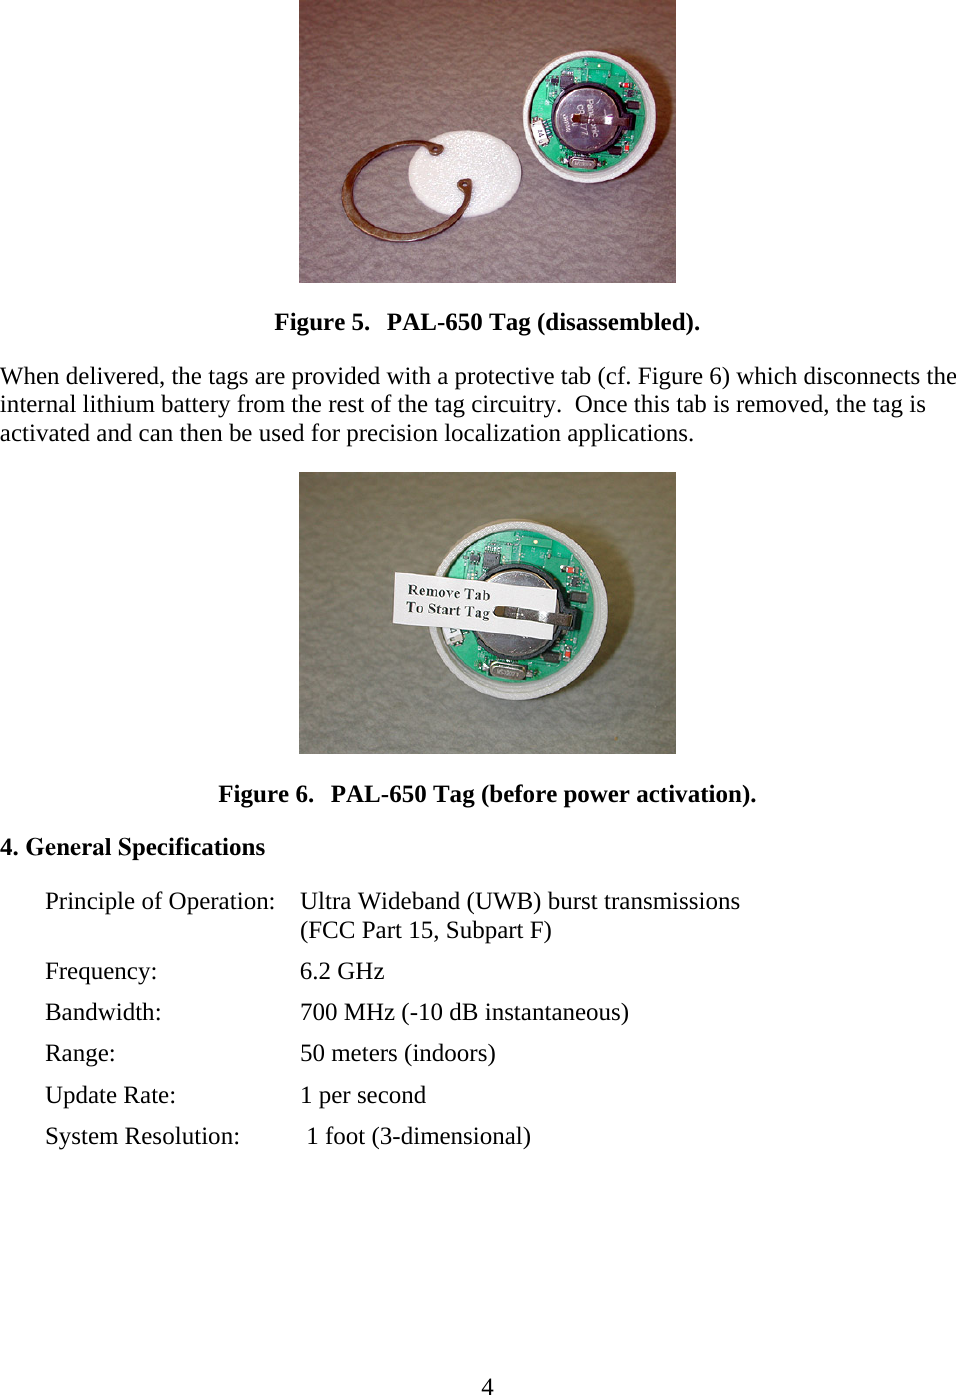   4 Figure 5. PAL-650 Tag (disassembled). When delivered, the tags are provided with a protective tab (cf. Figure 6) which disconnects the internal lithium battery from the rest of the tag circuitry.  Once this tab is removed, the tag is activated and can then be used for precision localization applications.  Figure 6. PAL-650 Tag (before power activation). 4. General SpecificationsPrinciple of Operation:  Ultra Wideband (UWB) burst transmissions (FCC Part 15, Subpart F) Frequency:   6.2 GHz Bandwidth:    700 MHz (-10 dB instantaneous) Range:   50 meters (indoors) Update Rate:    1 per secondSystem Resolution:  1 foot (3-dimensional)  